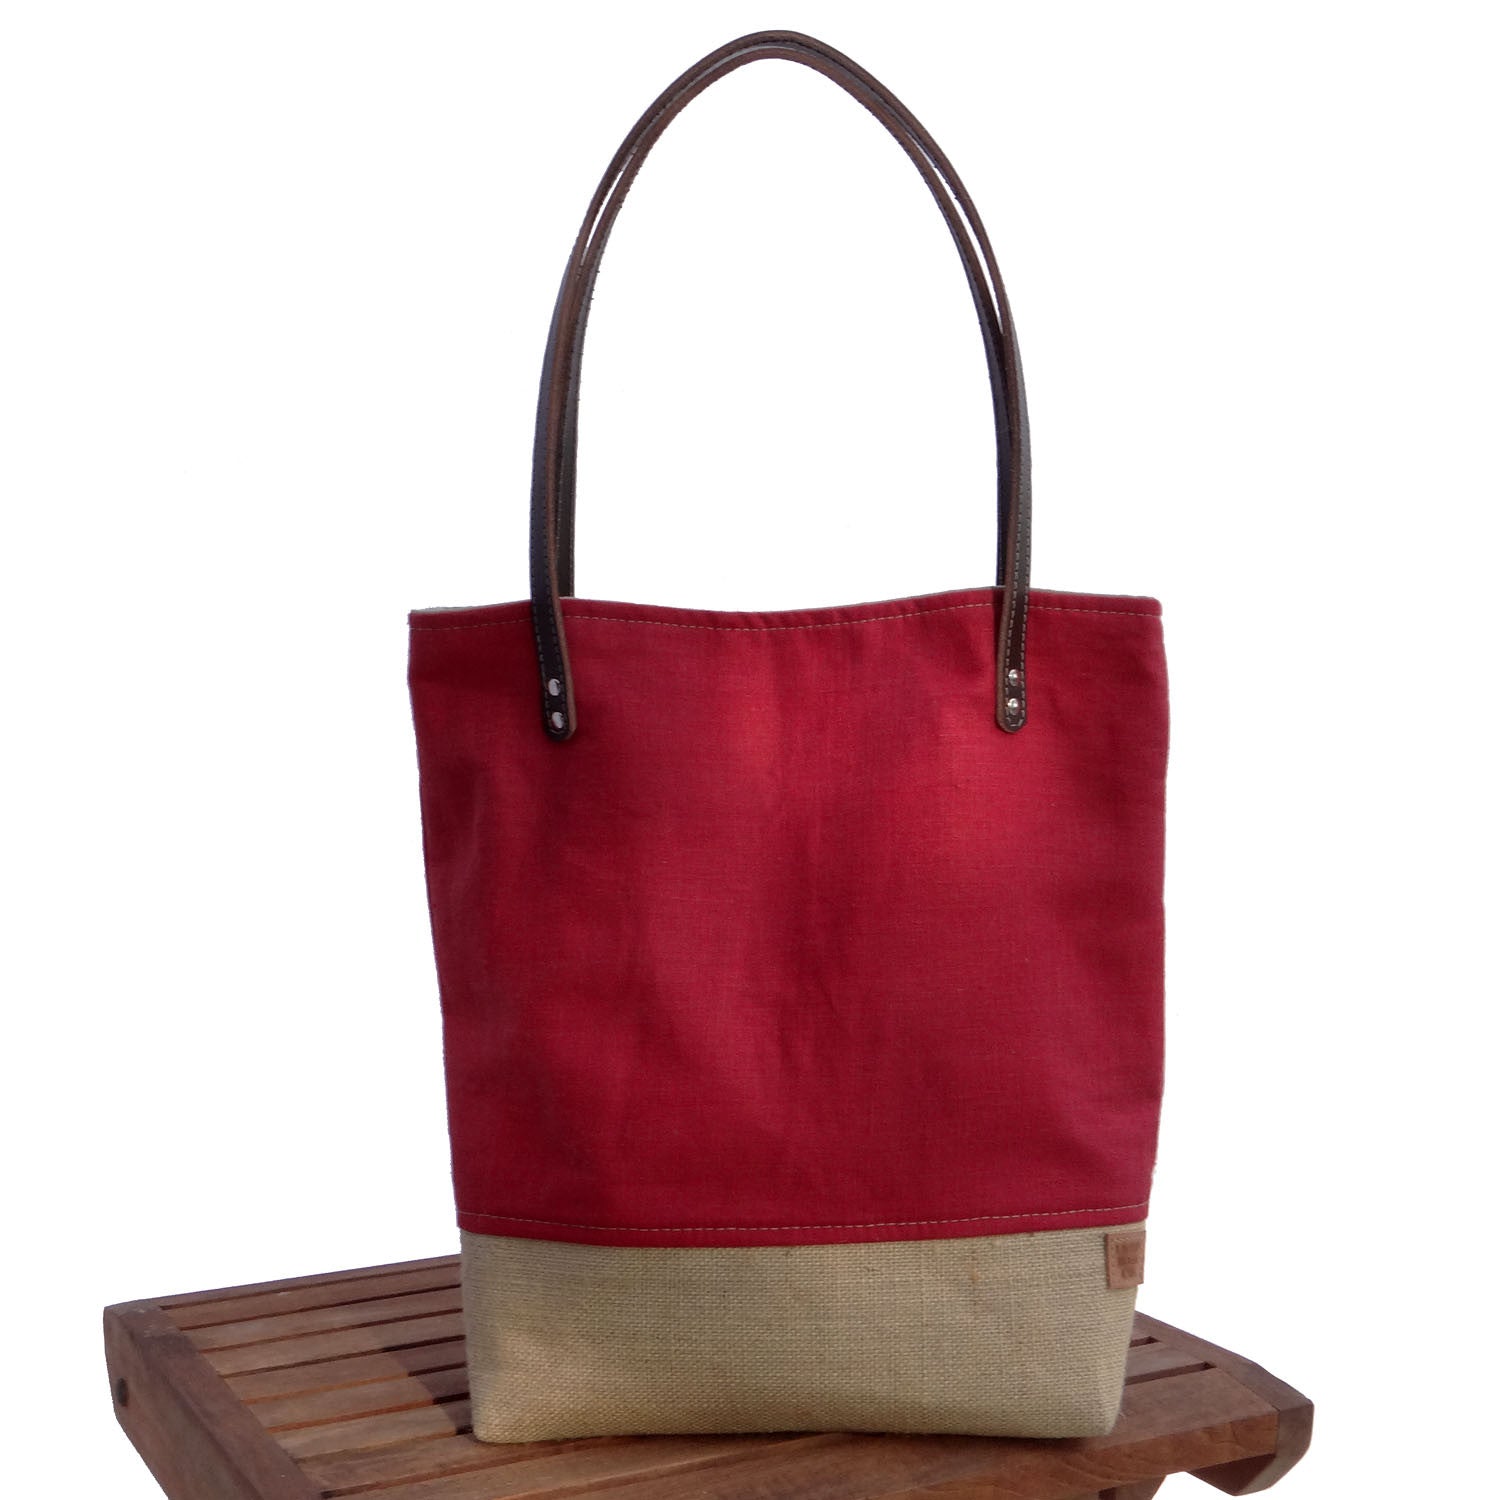 Panama Linen and Burlap Tote Bag - Red and Beige | 1820 Bag Co.